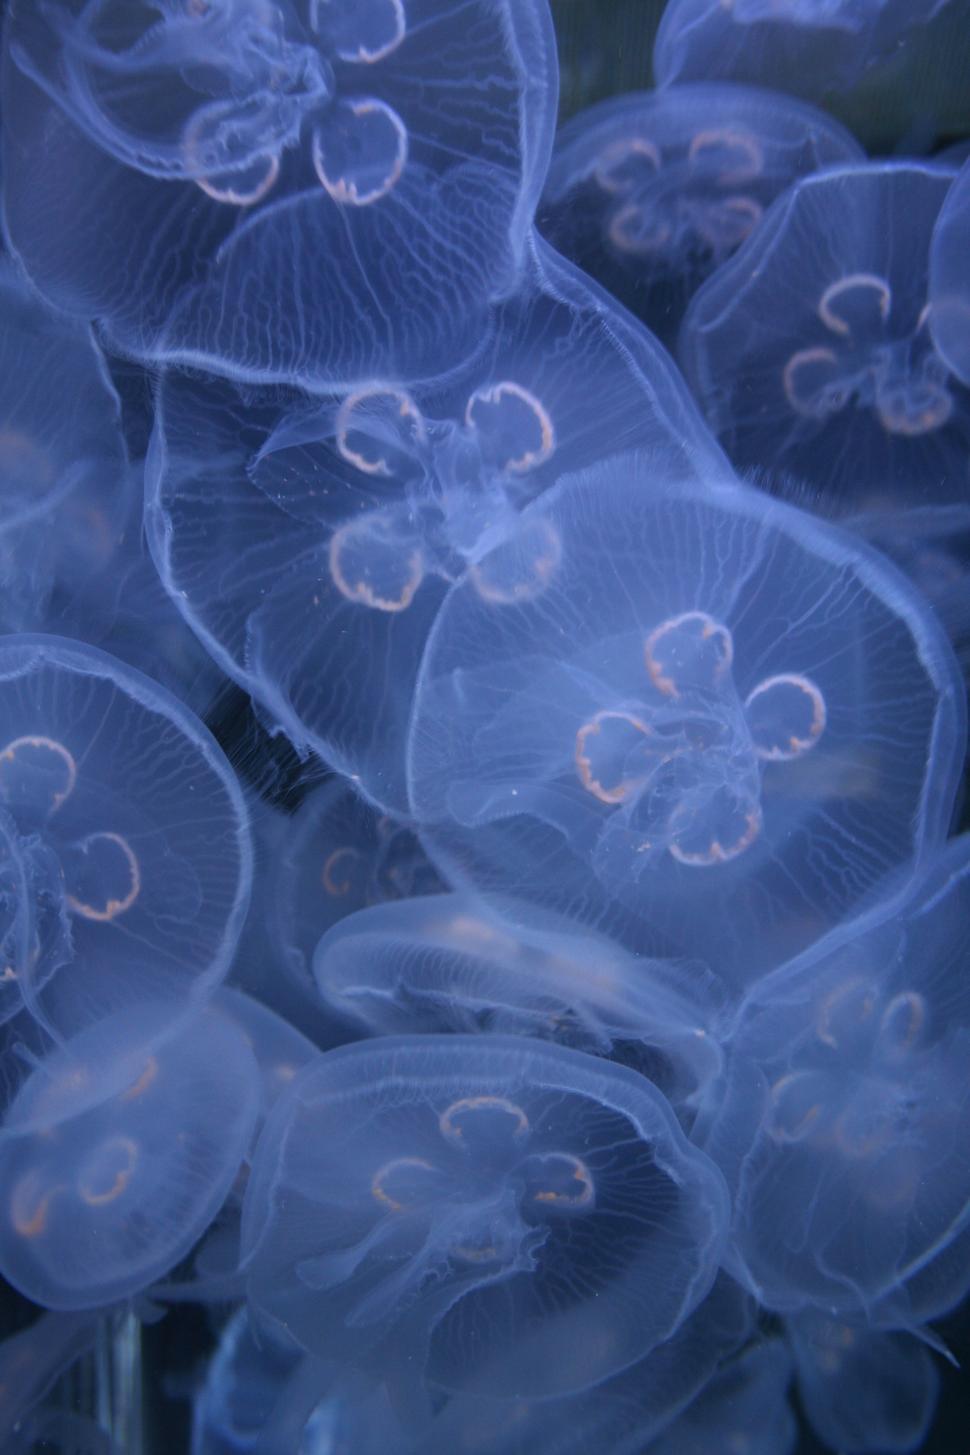 Free Image of Floating Jellyfish Swarm in the Water 